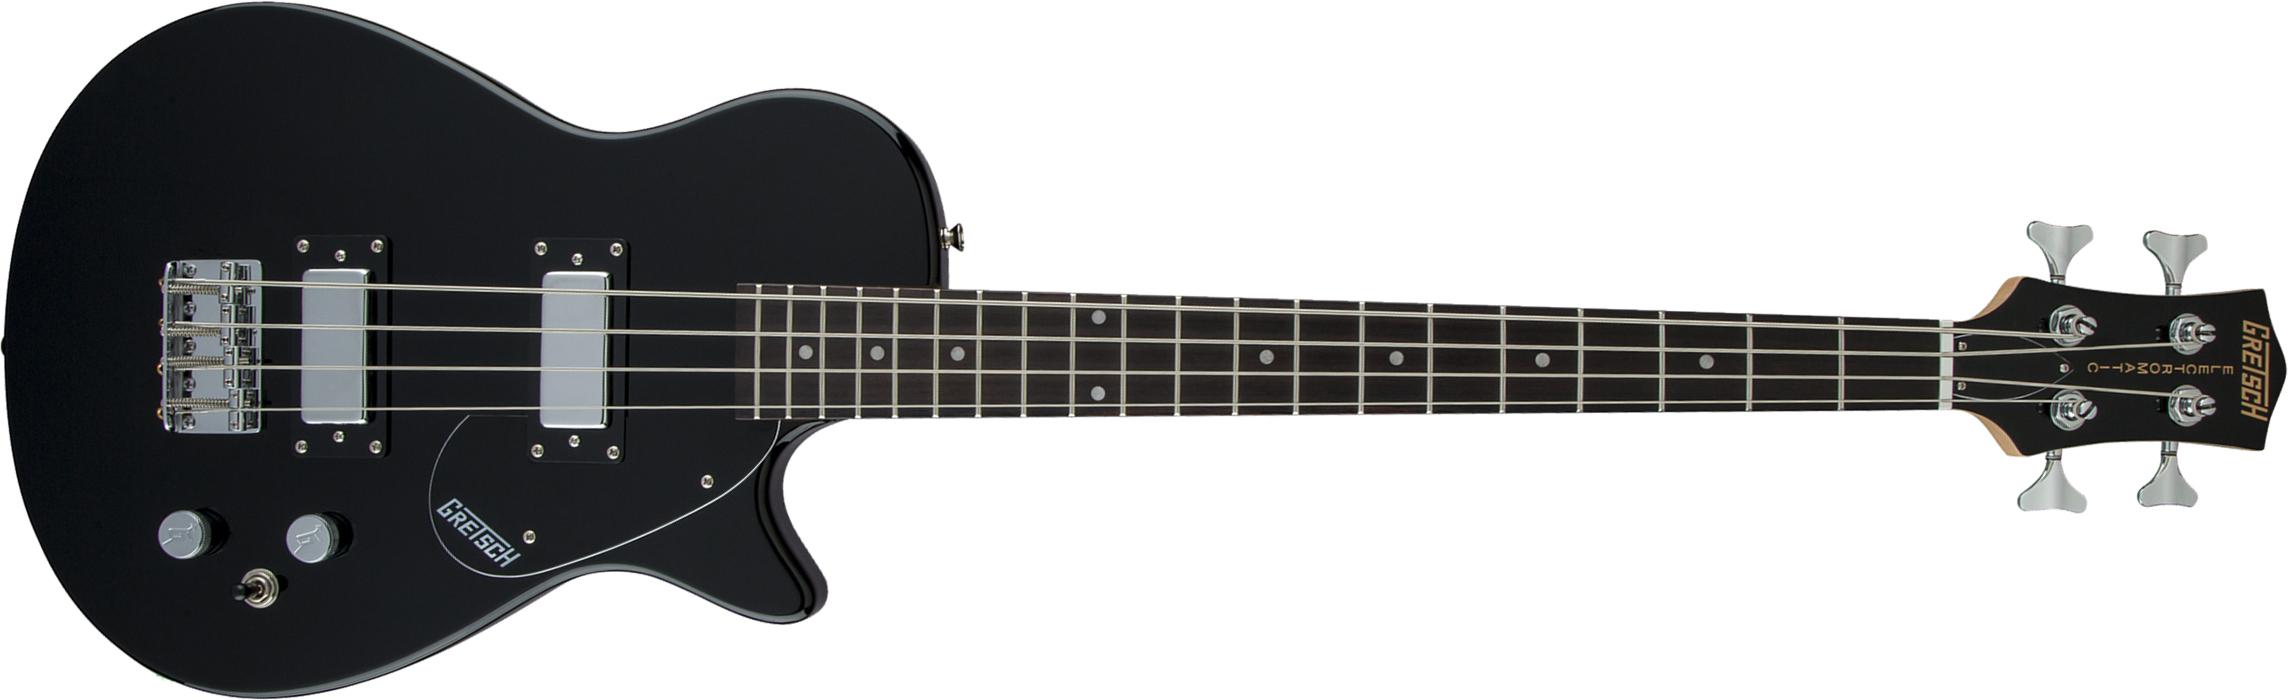 Gretsch G2220 Electromatic Junior Jet Bass Ii Short-scale 2019 Hh Wal - Black - Basse Électrique Solid Body - Main picture